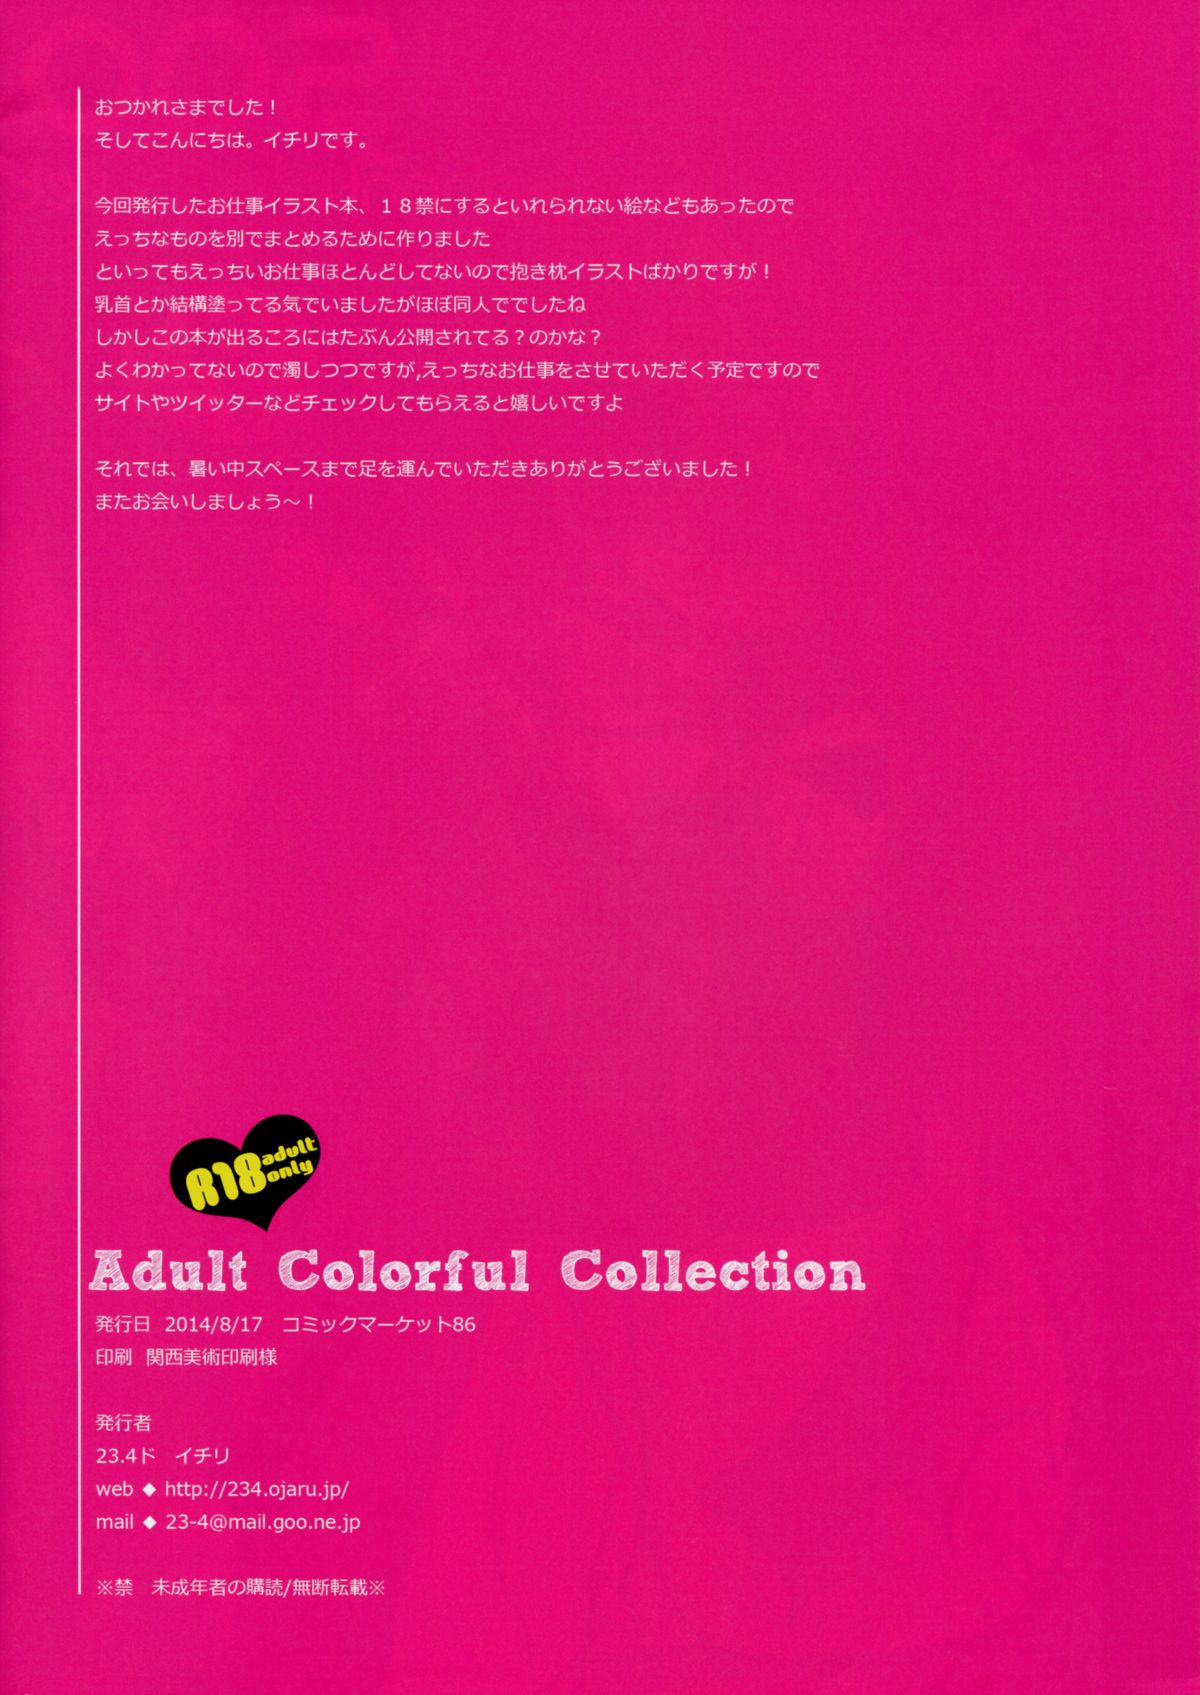 (C86) [23.4ド (イチリ)] Adult Colorful Collection